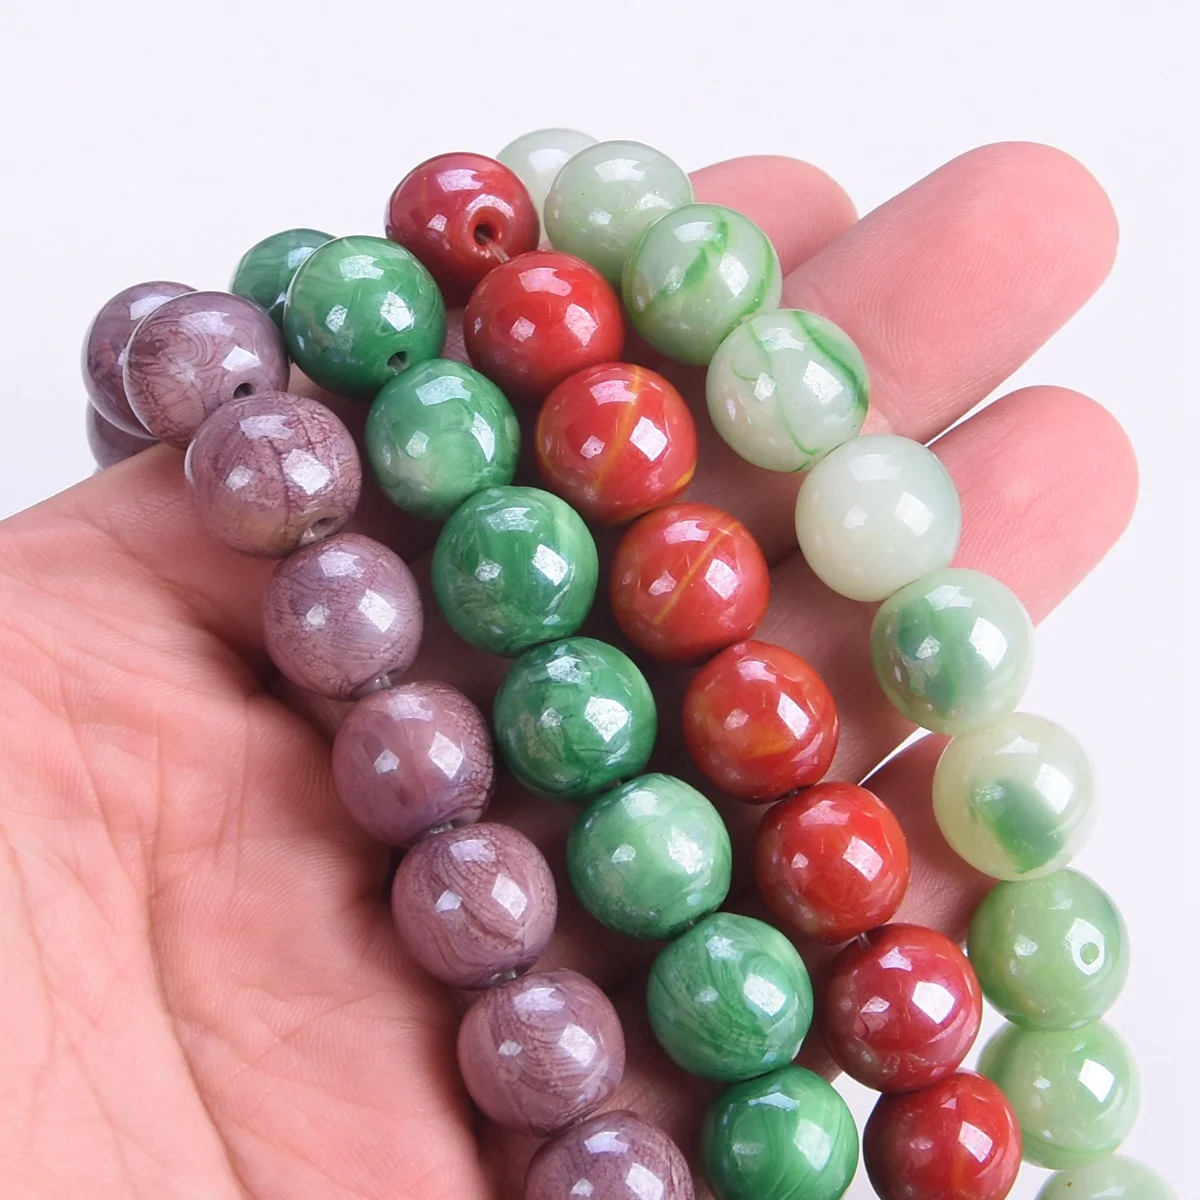 10pcs 14mm Round Jade Like Opaque Lampwork Glass Loose Crafts Beads For Jewelry Making DIY Bracelet Findings